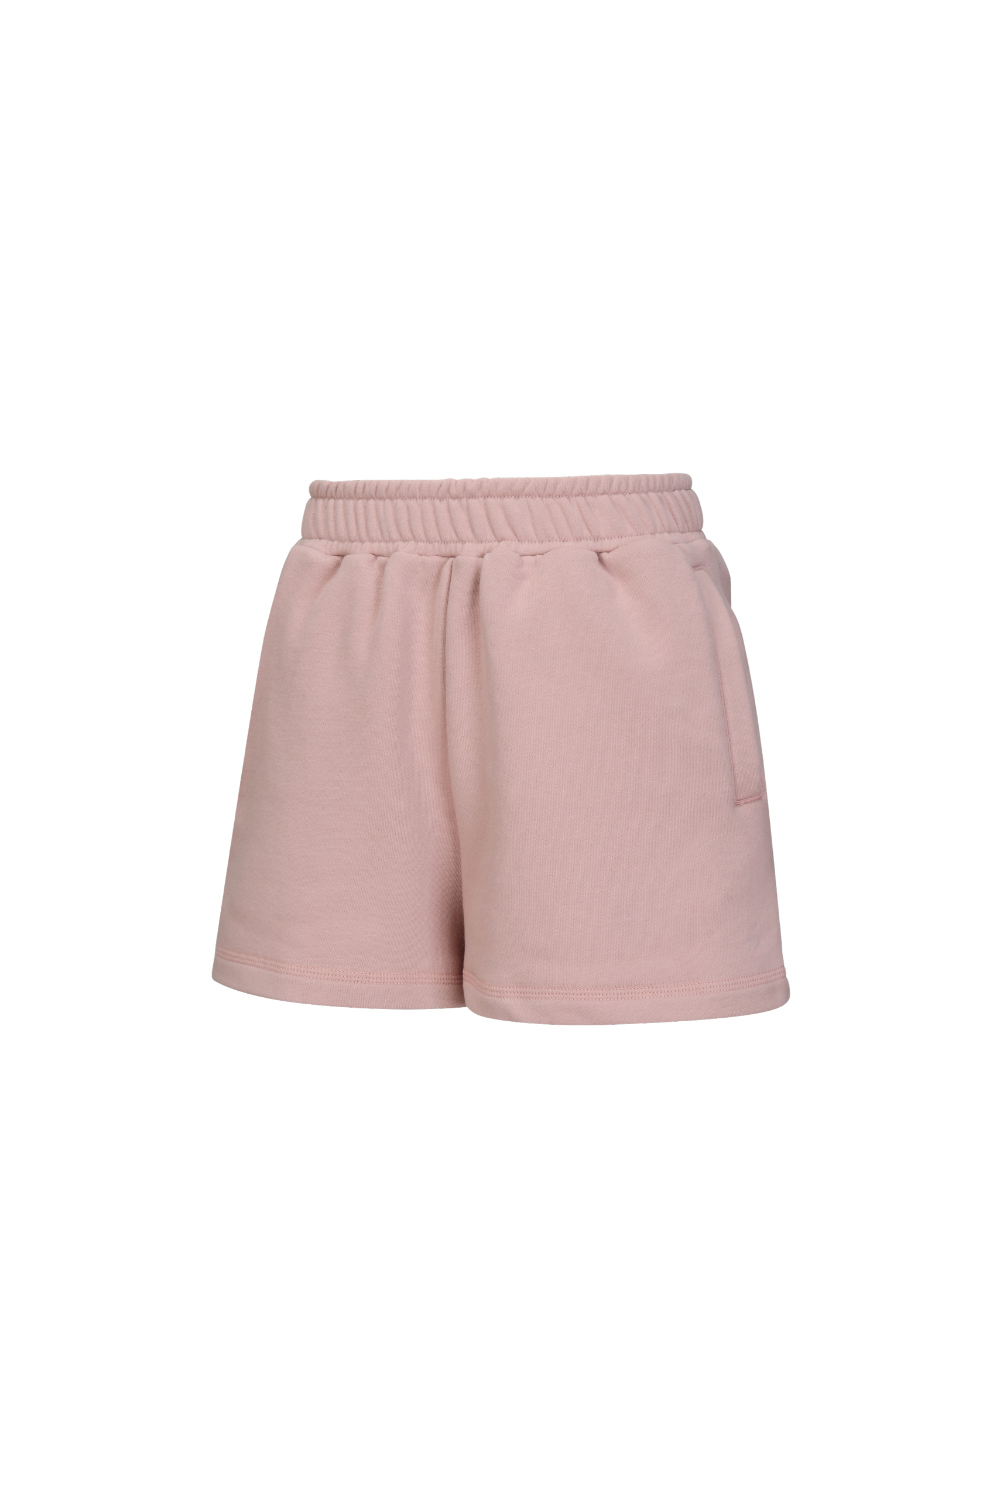 shorts baby pink color image-S2L3